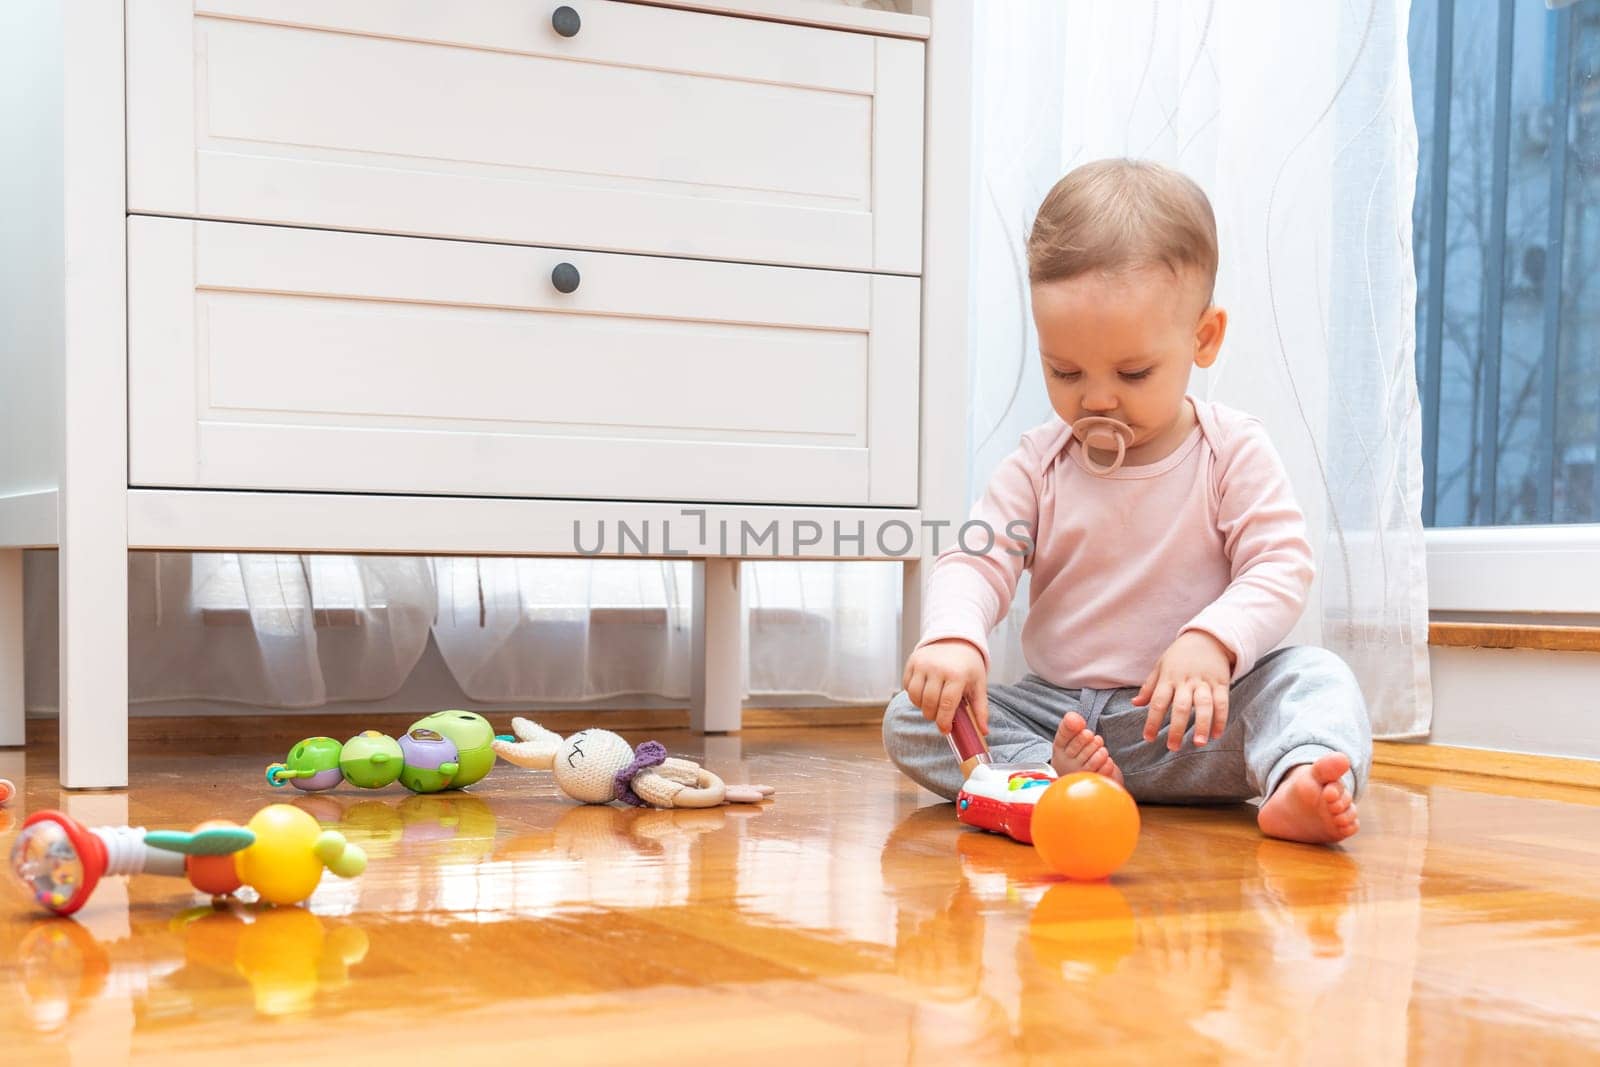 A baby with a pacifier in his mouth interacts with interest with toys while playing in the room.